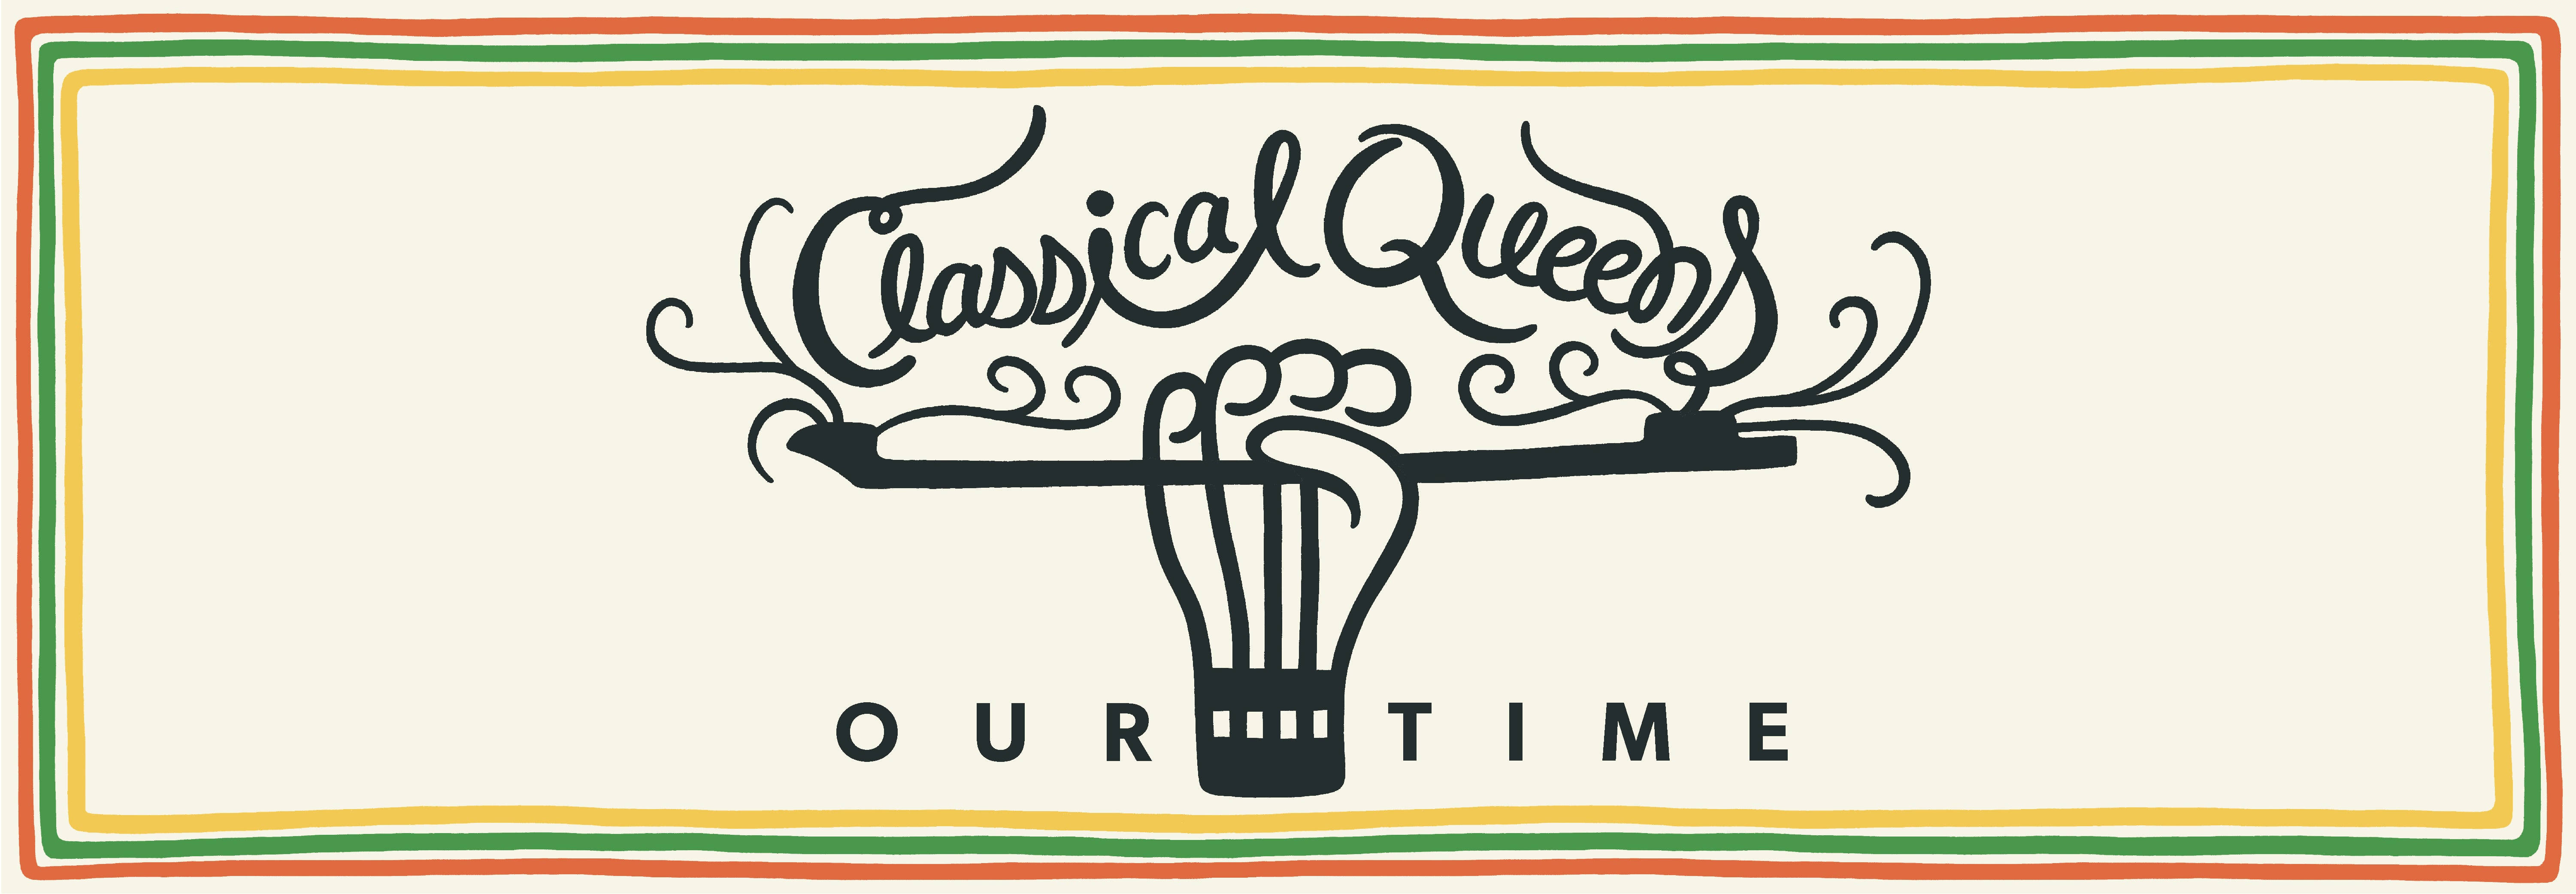 Classical Queens: Our Time